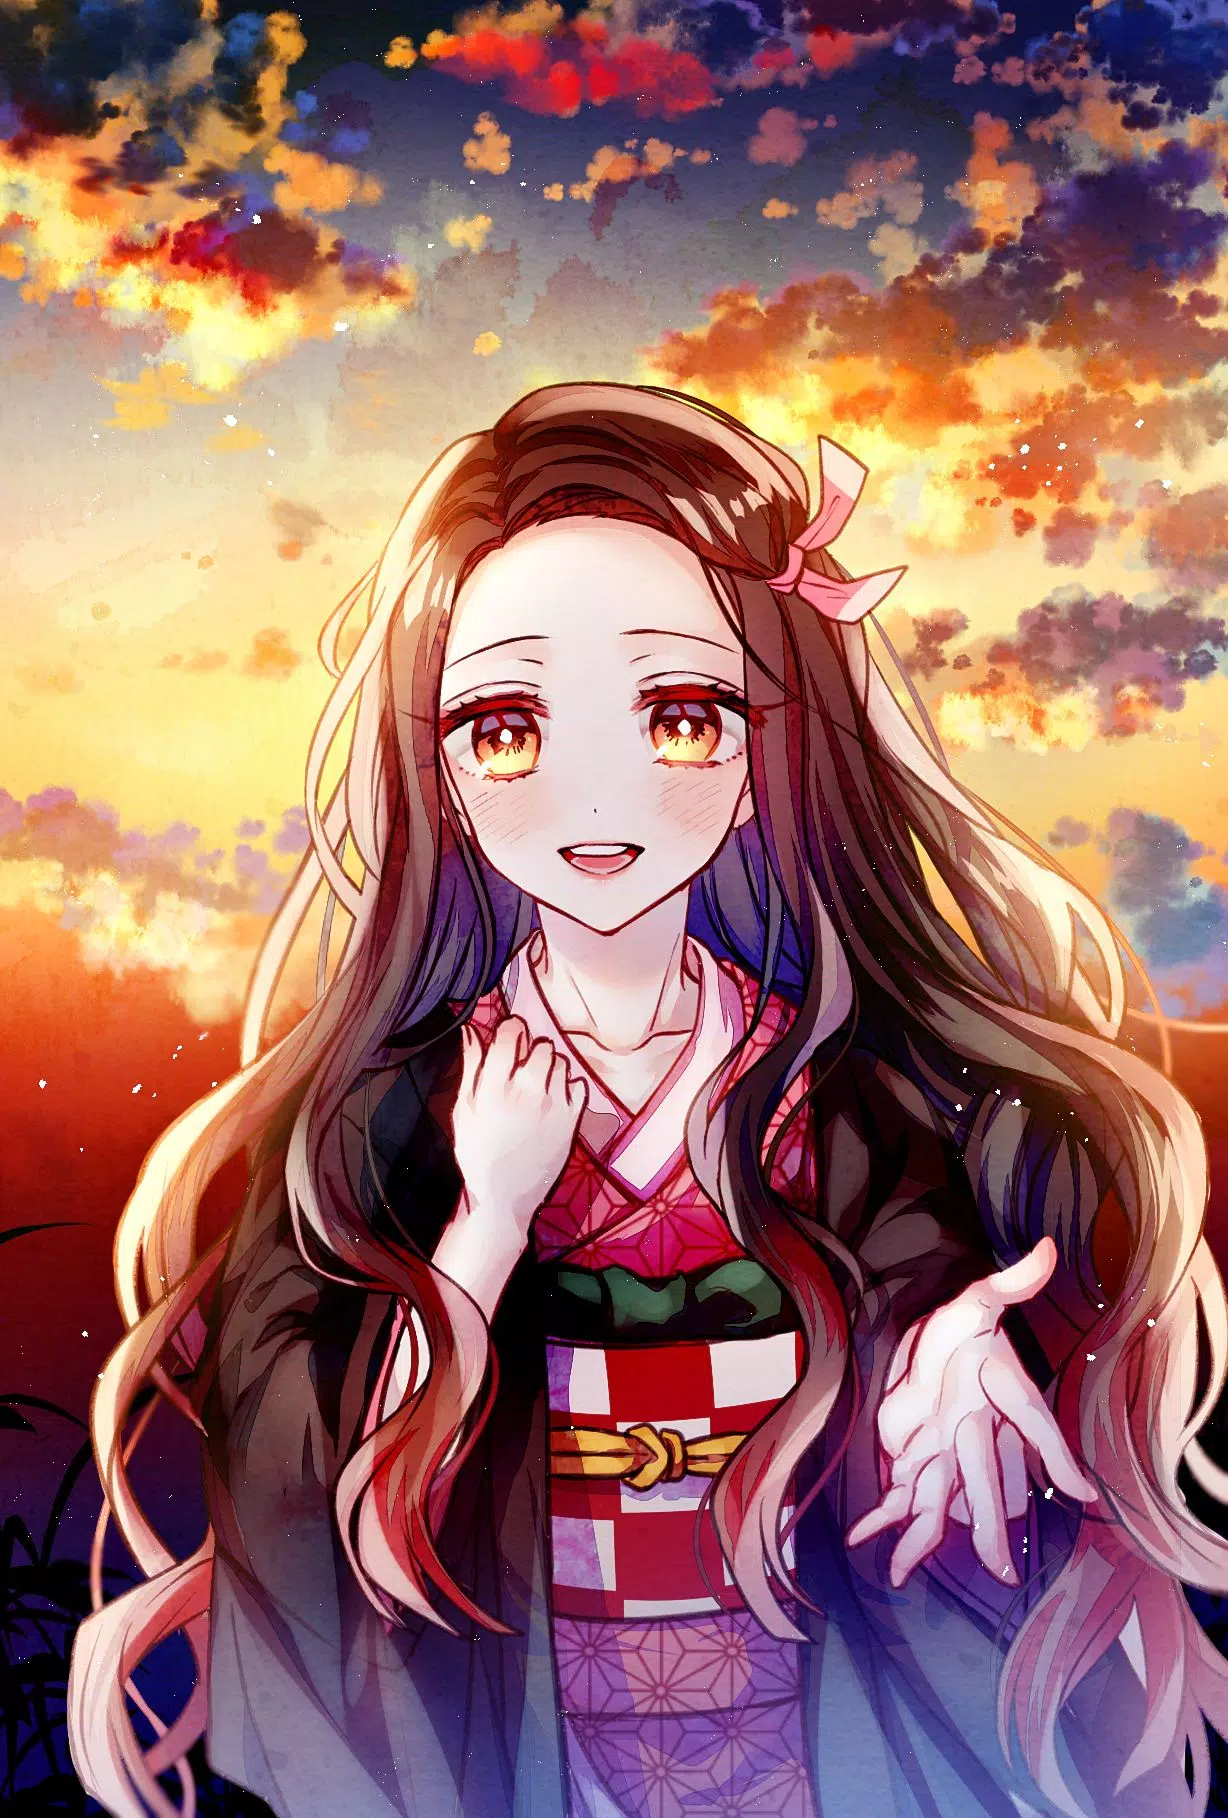 Anime girl with long hair and a kimono standing in front of a sunset - Nezuko